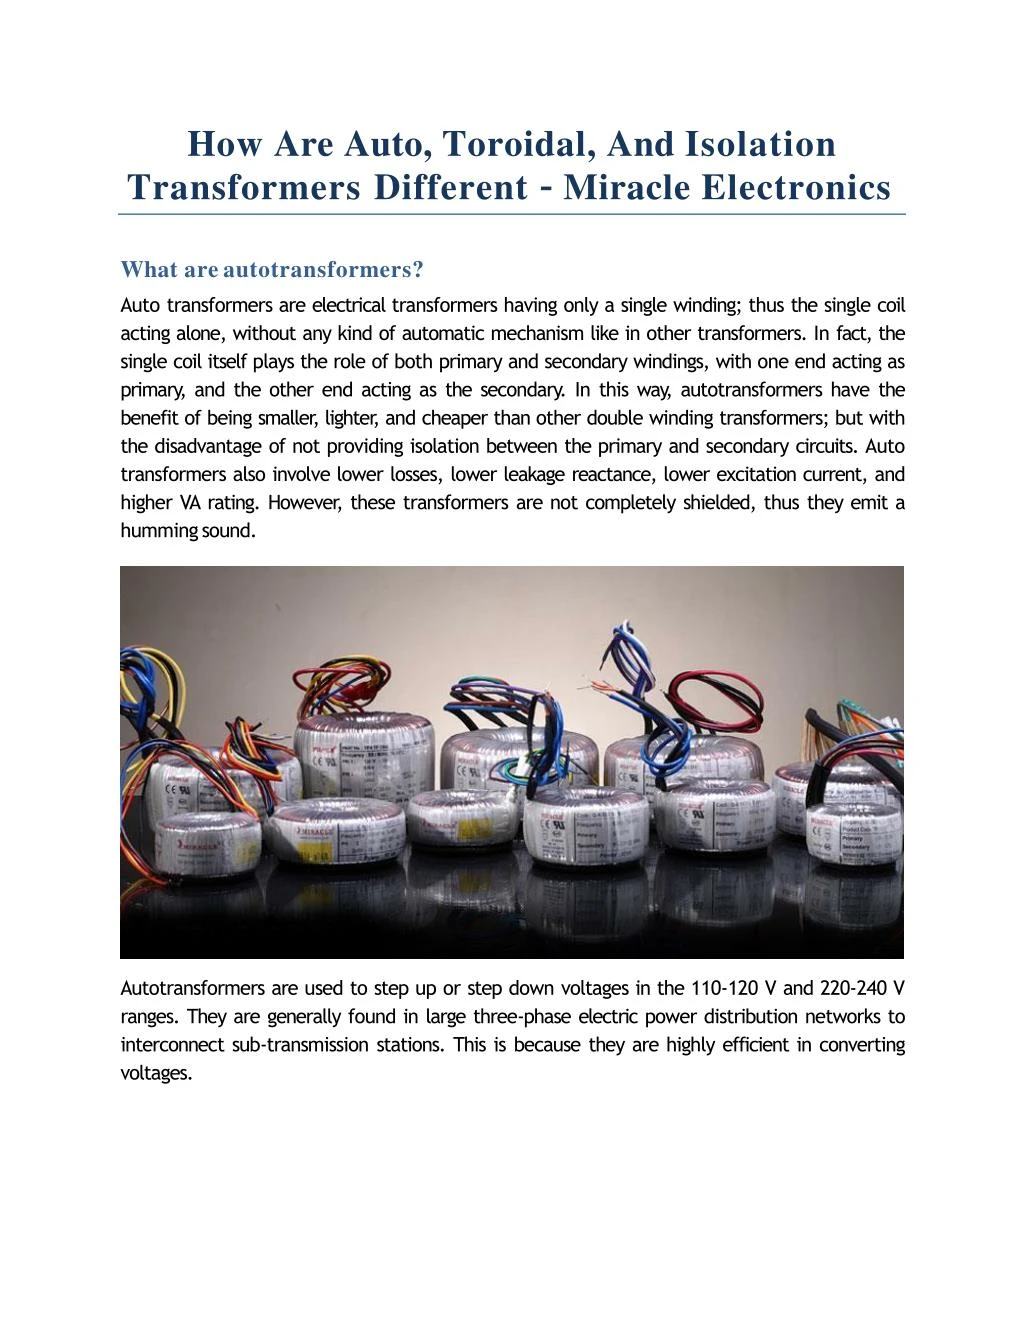 how are auto toroidal and isolation transformers different miracle electronics